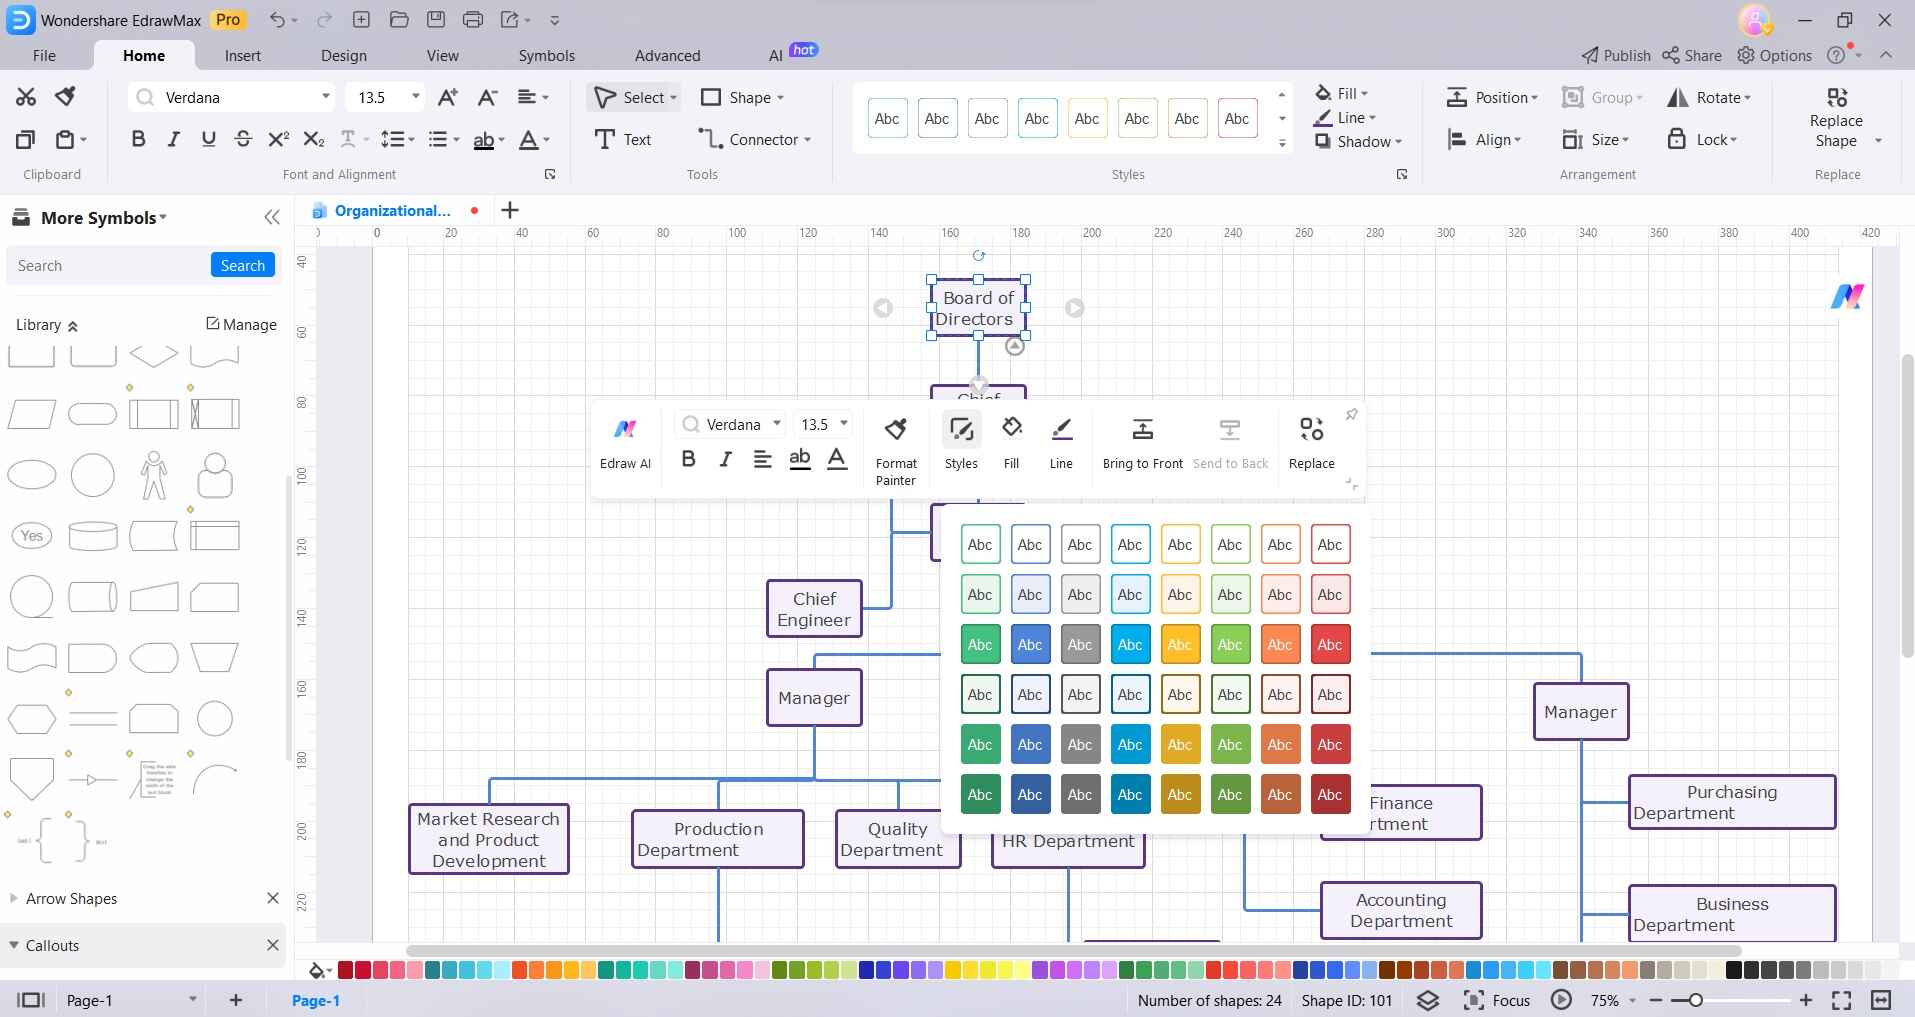 format color and style of org chart in edrawmax